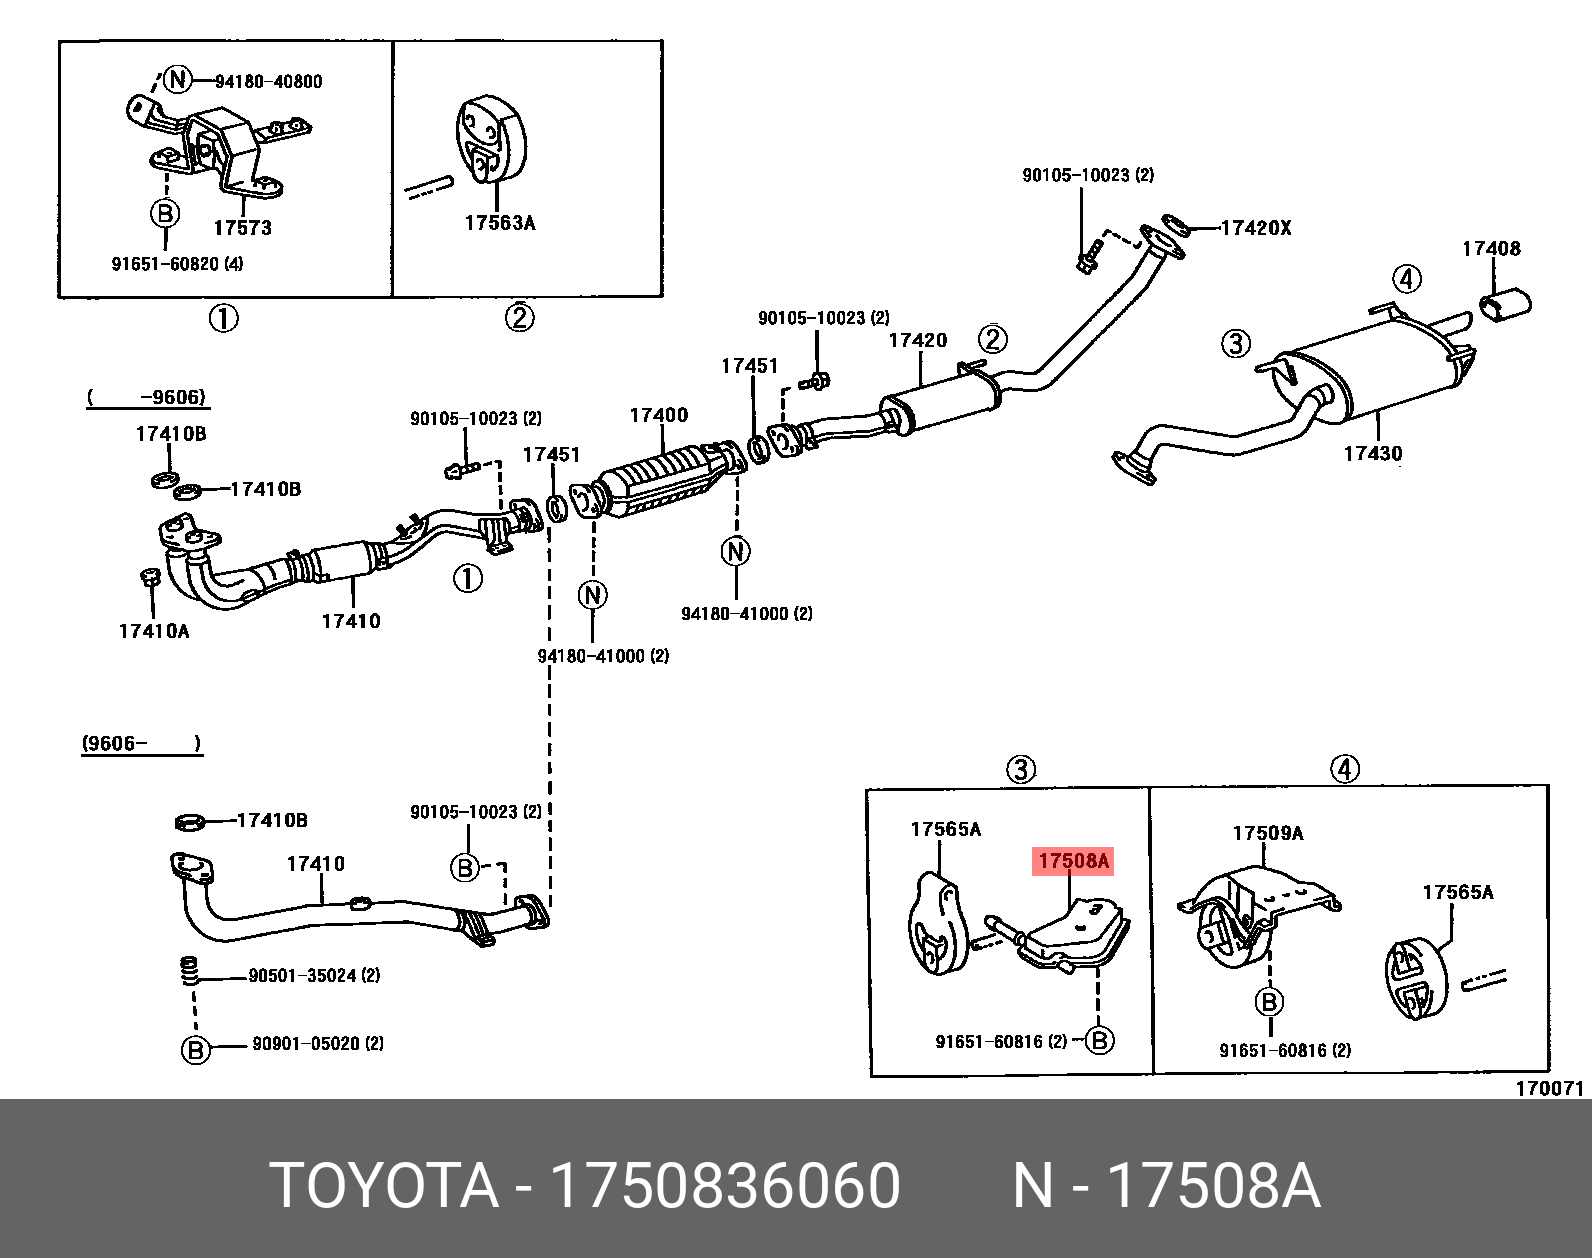 CAMRY HYBRID 201108 - 201704, BRACKET SUB-ASSY, EXHAUST PIPE NO.4 SUPPORT